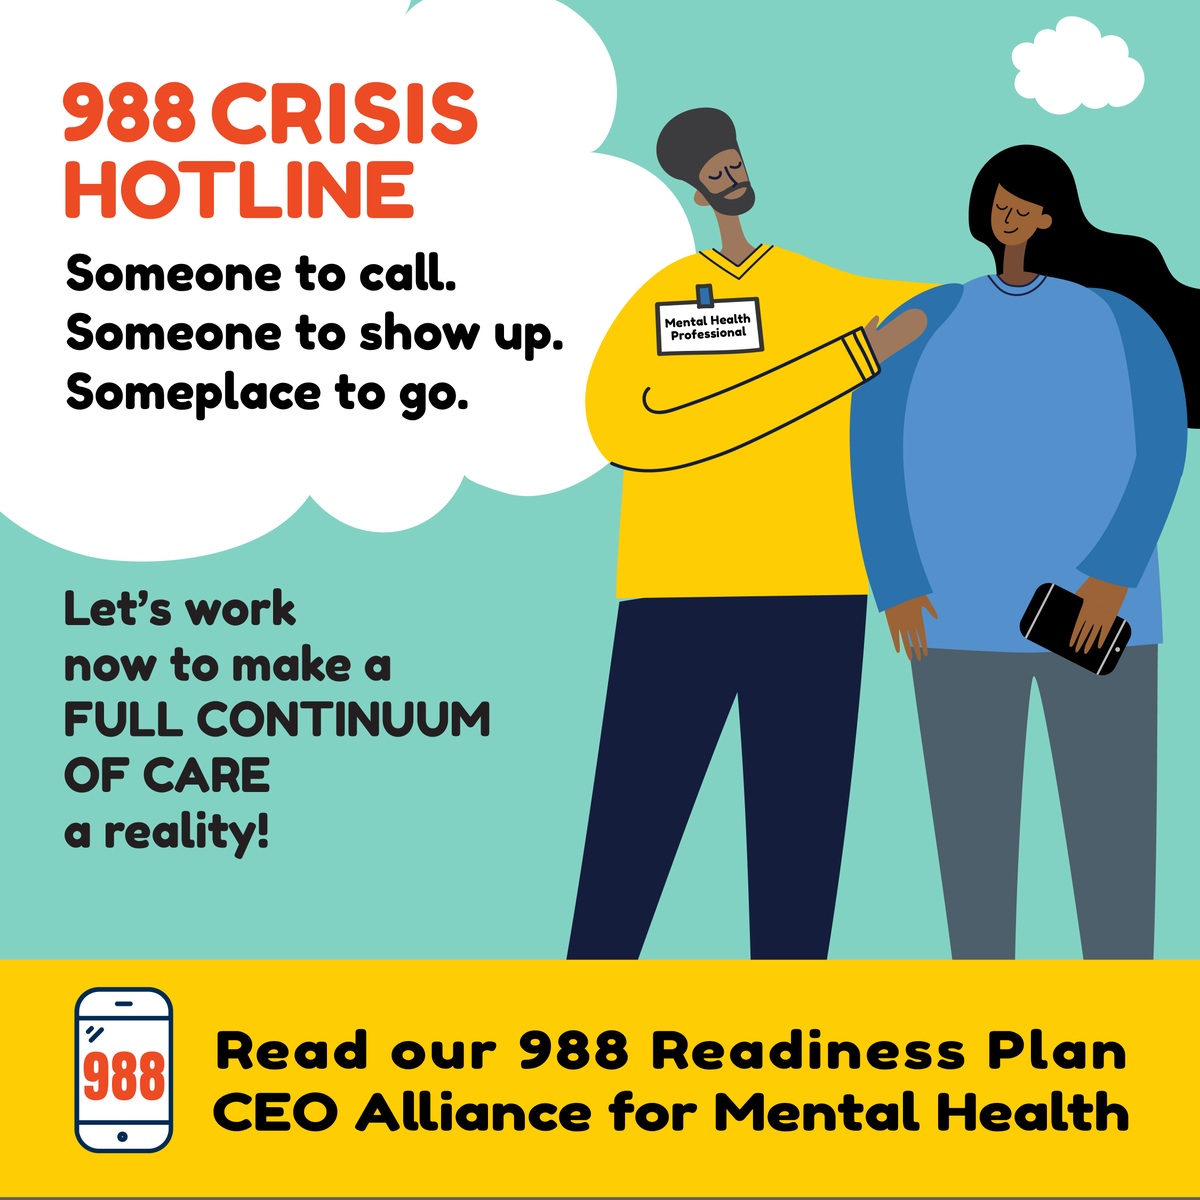 We’re less than 100 days out from launch of the 988 mental health crisis hotline. State and municipal leaders must prepare for the full continuum of care: • Someone to call • Someone to show up • Someplace to go See our readiness plan: wellbeingtrust.org/uncategorized/…